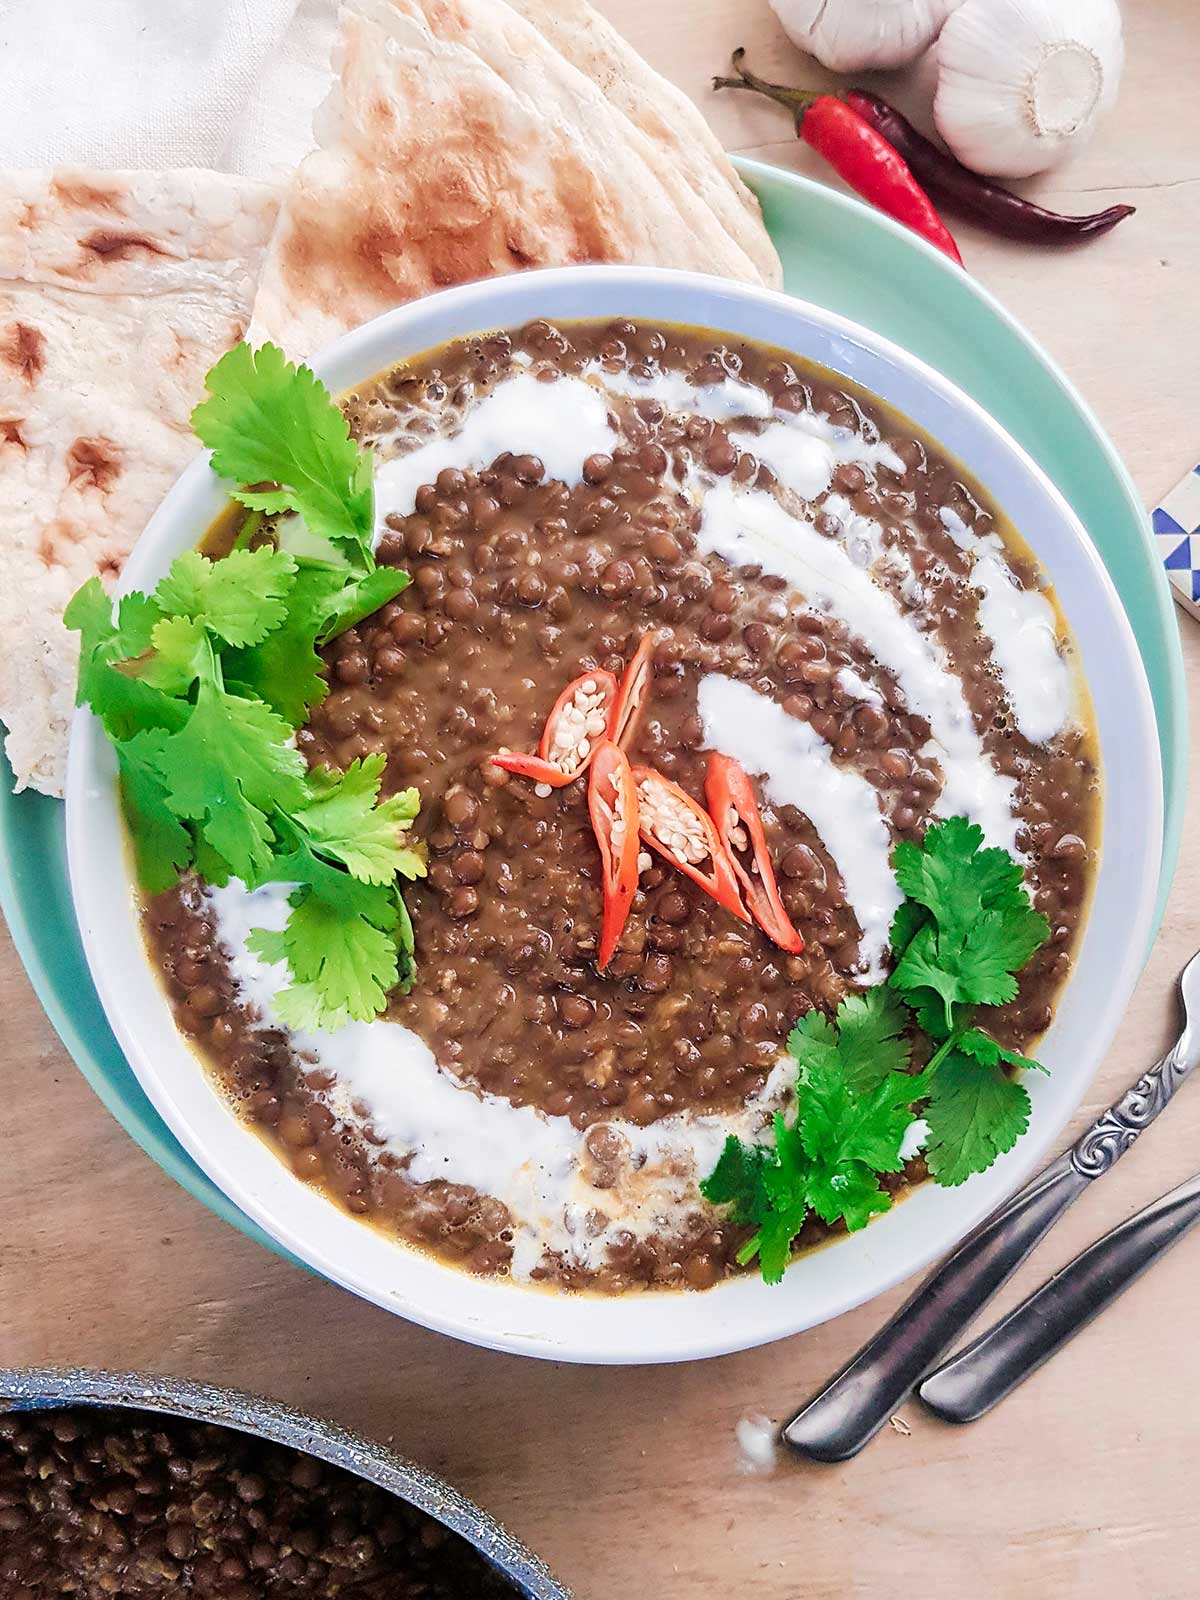 Brown lentil curry served in a white bowl garnished with green cilantro leaves, coconut cream and red chilies.